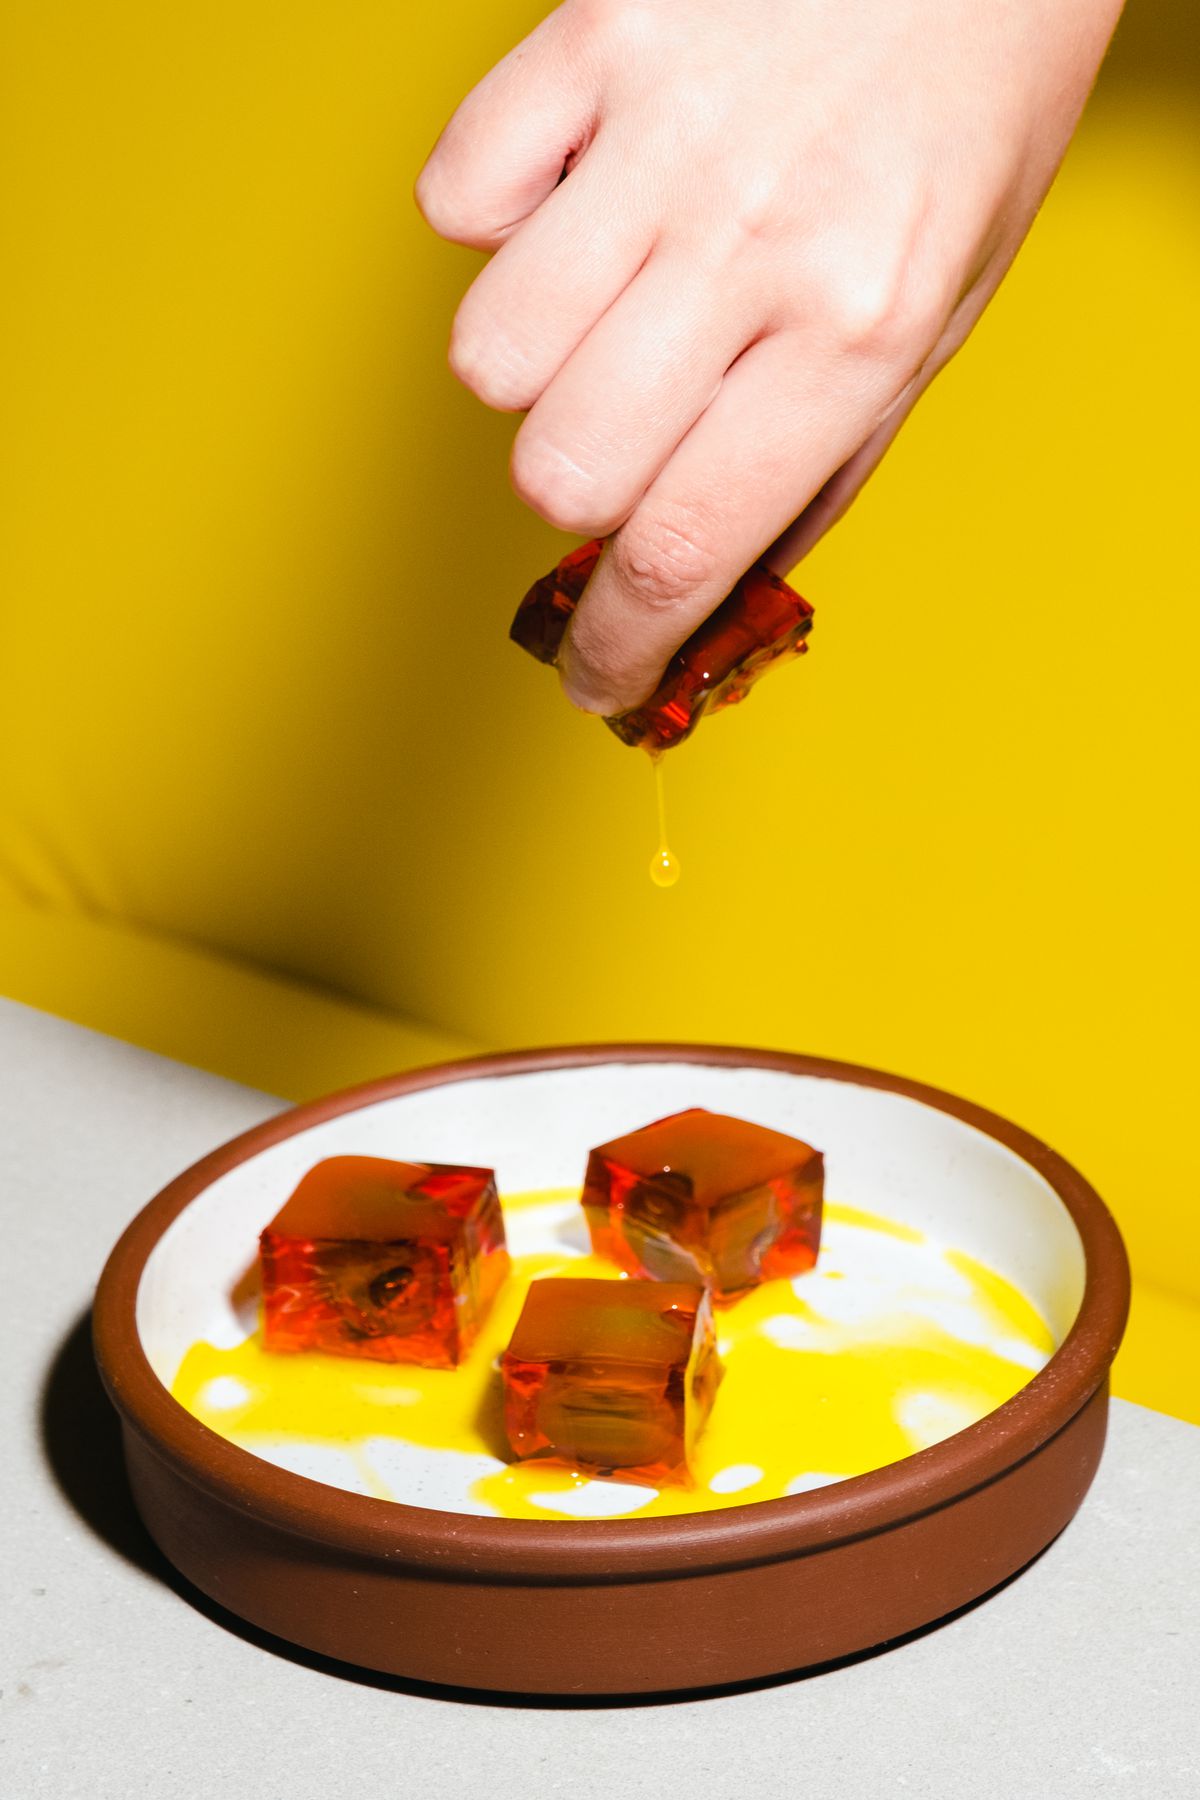 A hand holding a Negroni jelly olive.